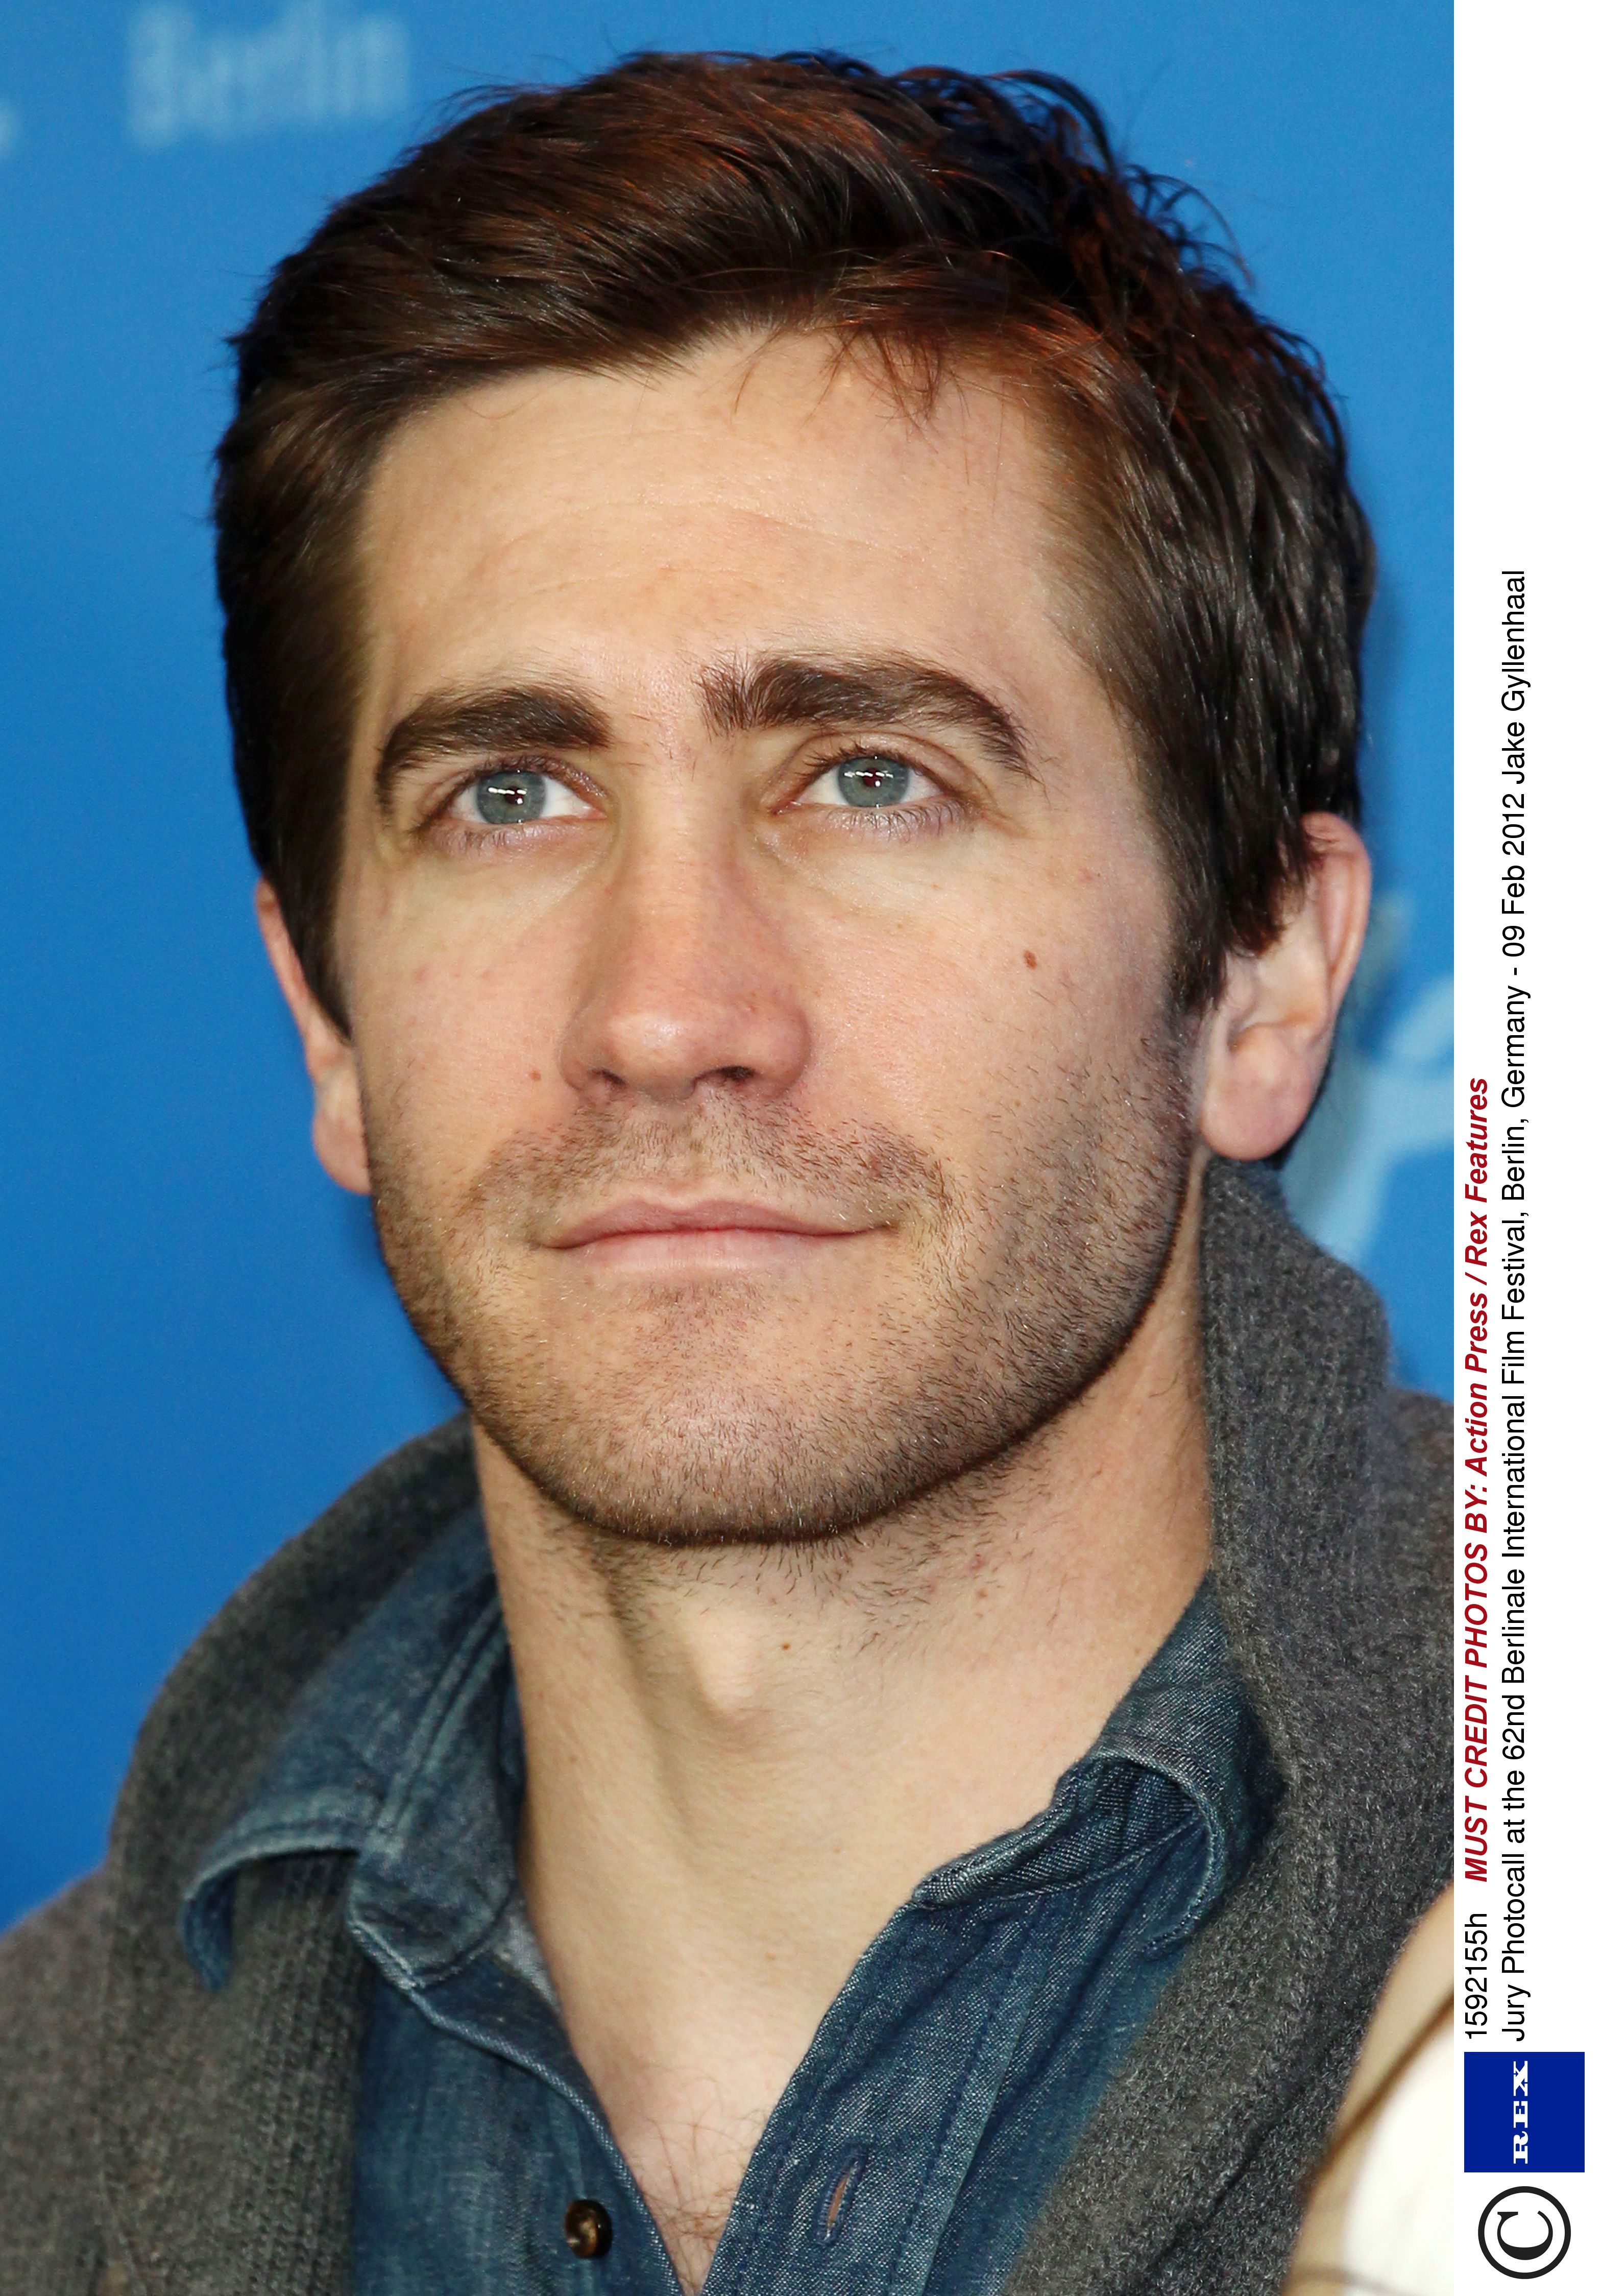 Jake Gyllenhaal Nearly Played Spider-Man (and Thank God He Didn't)